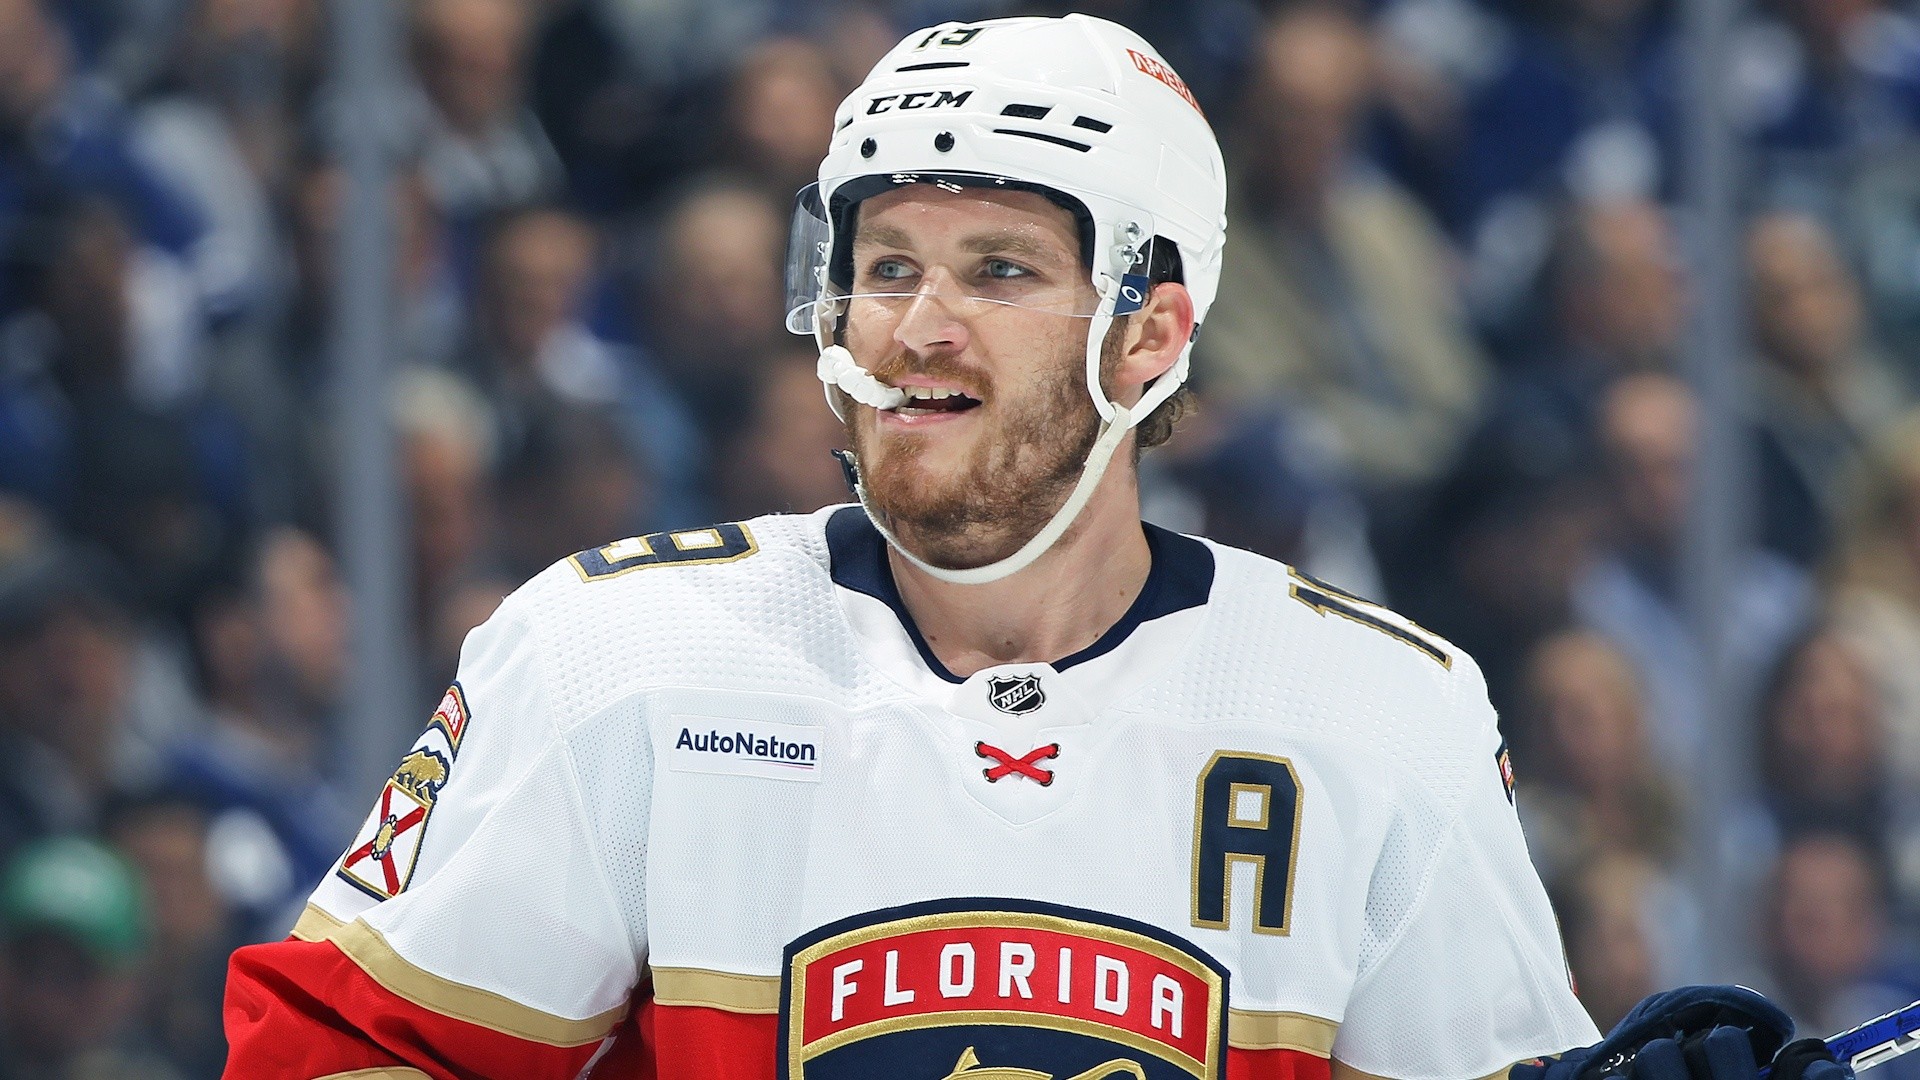 Another Tkachuk ready to make his mark on NHL